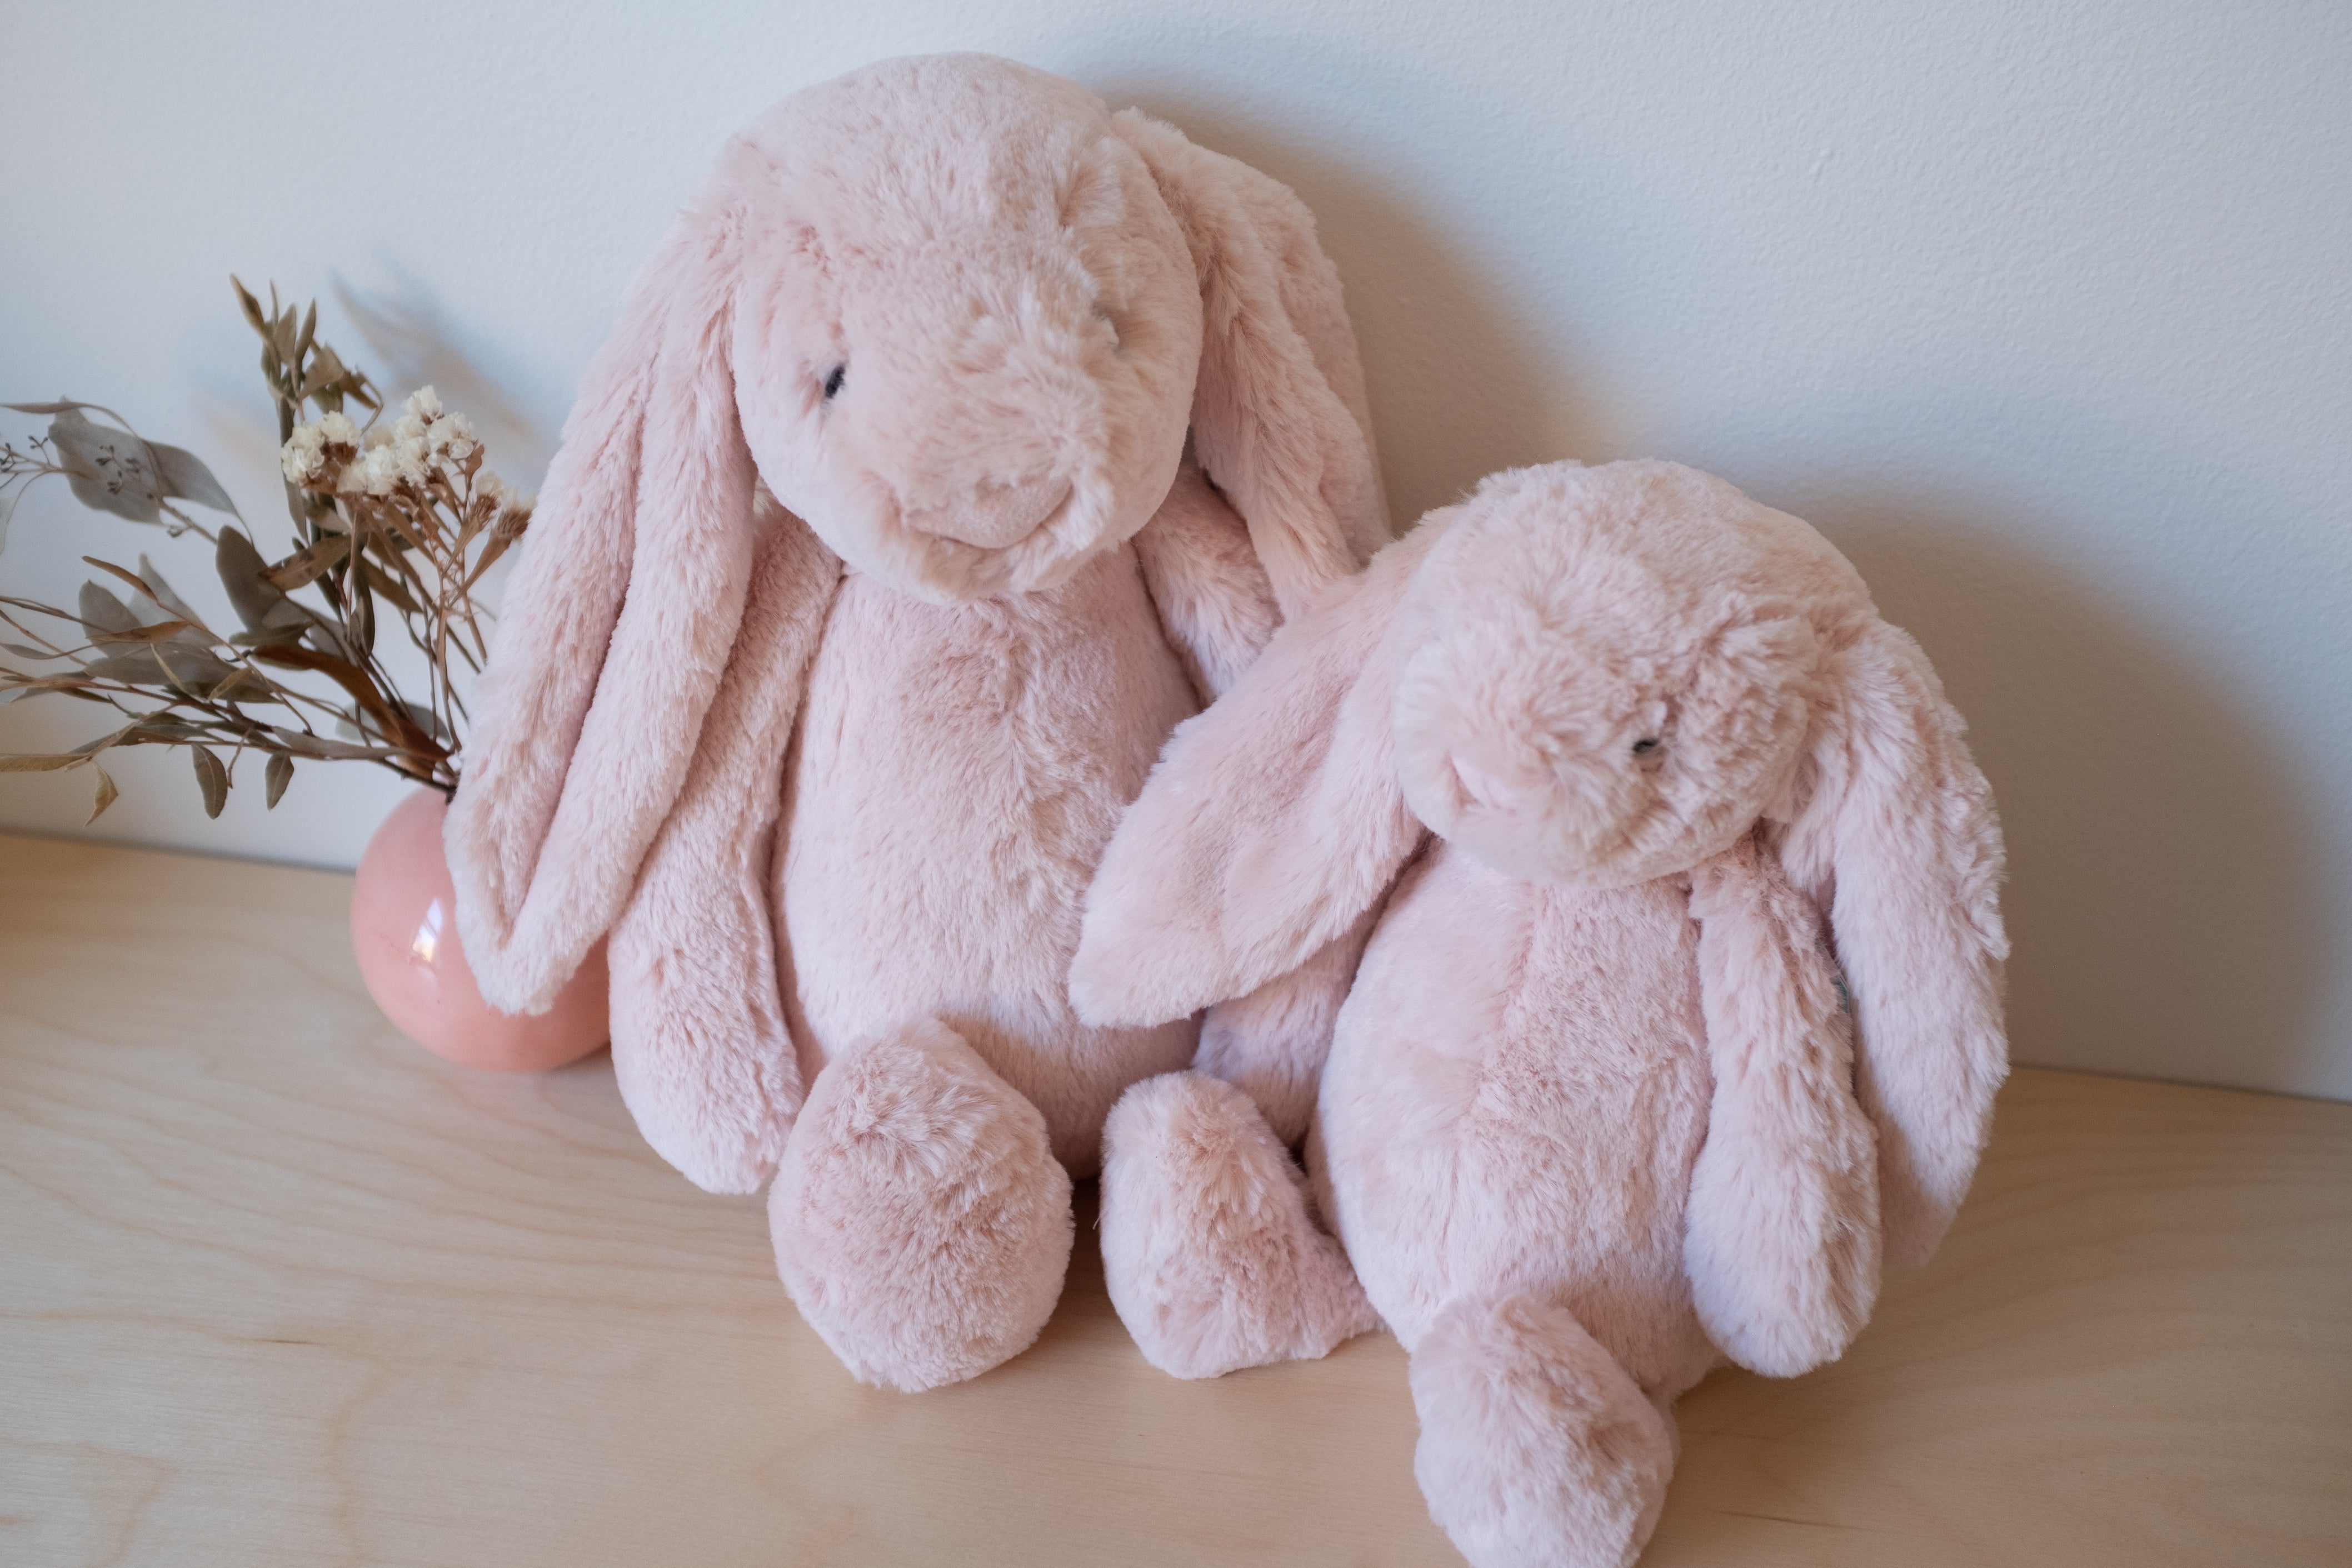 Peluche lapin rose really big - JELLYCAT